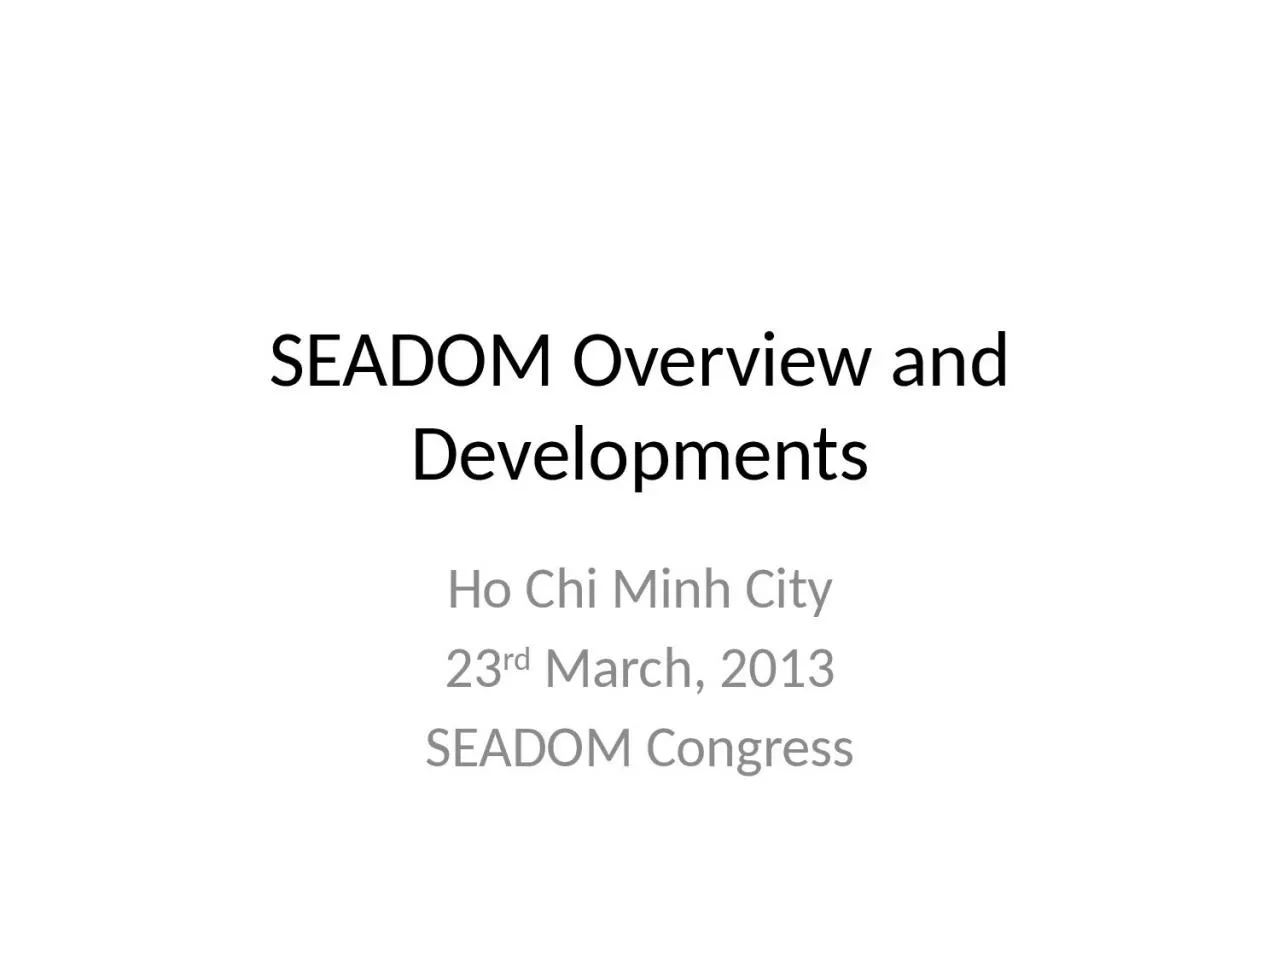 SEADOM Overview and Developments